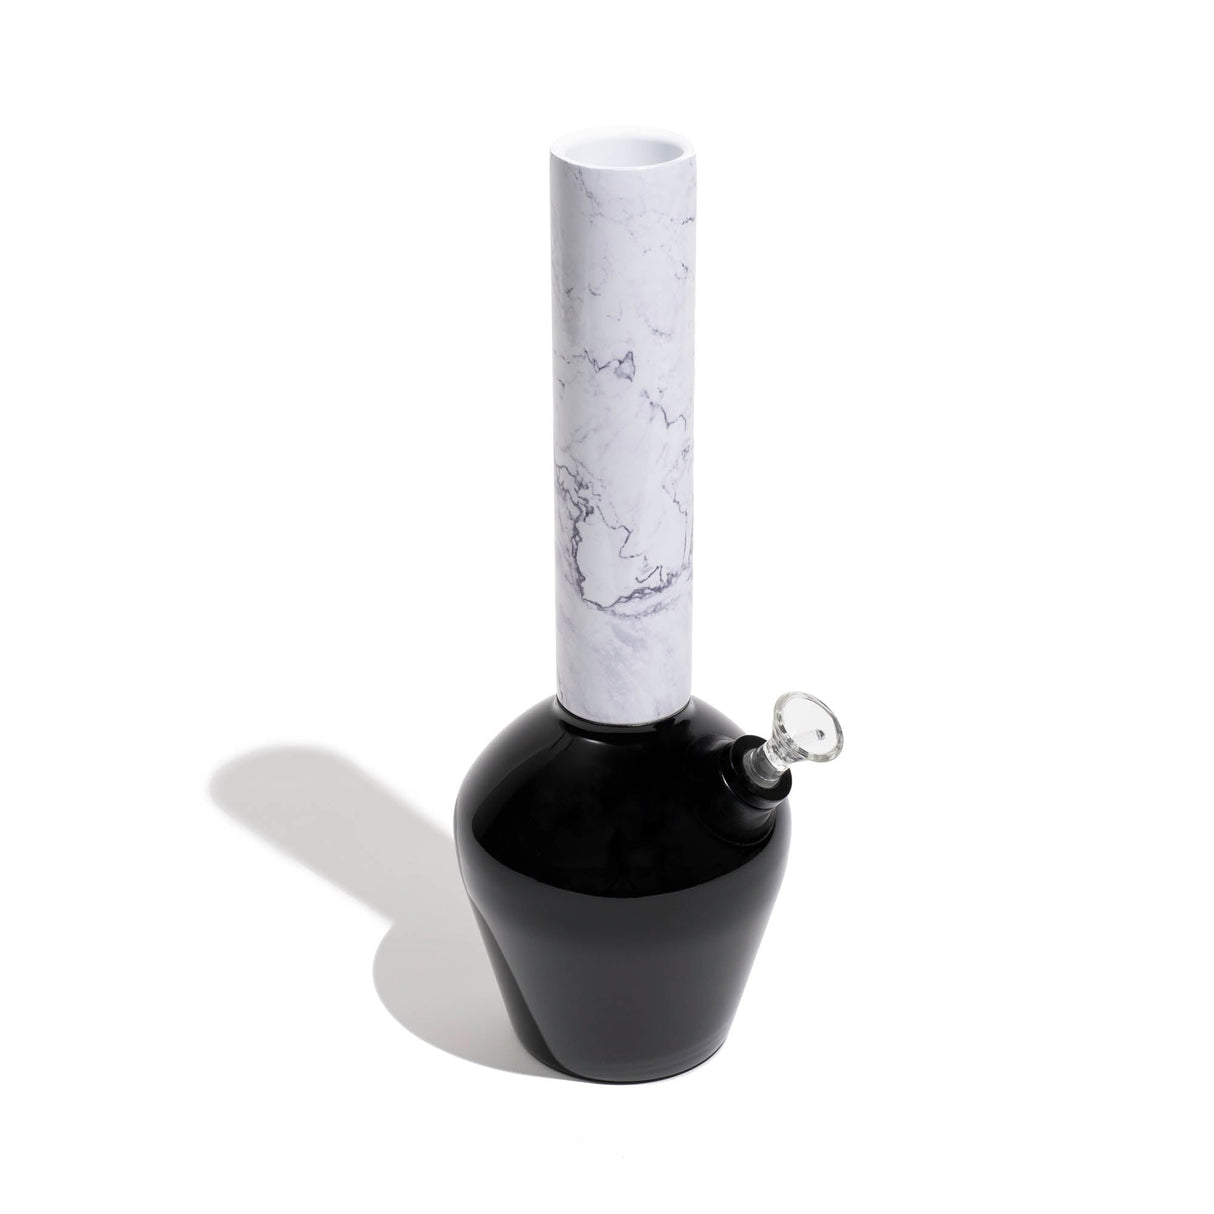 Chill Steel Pipes - White Marble Neckpiece for Bong, Black Base, Top View